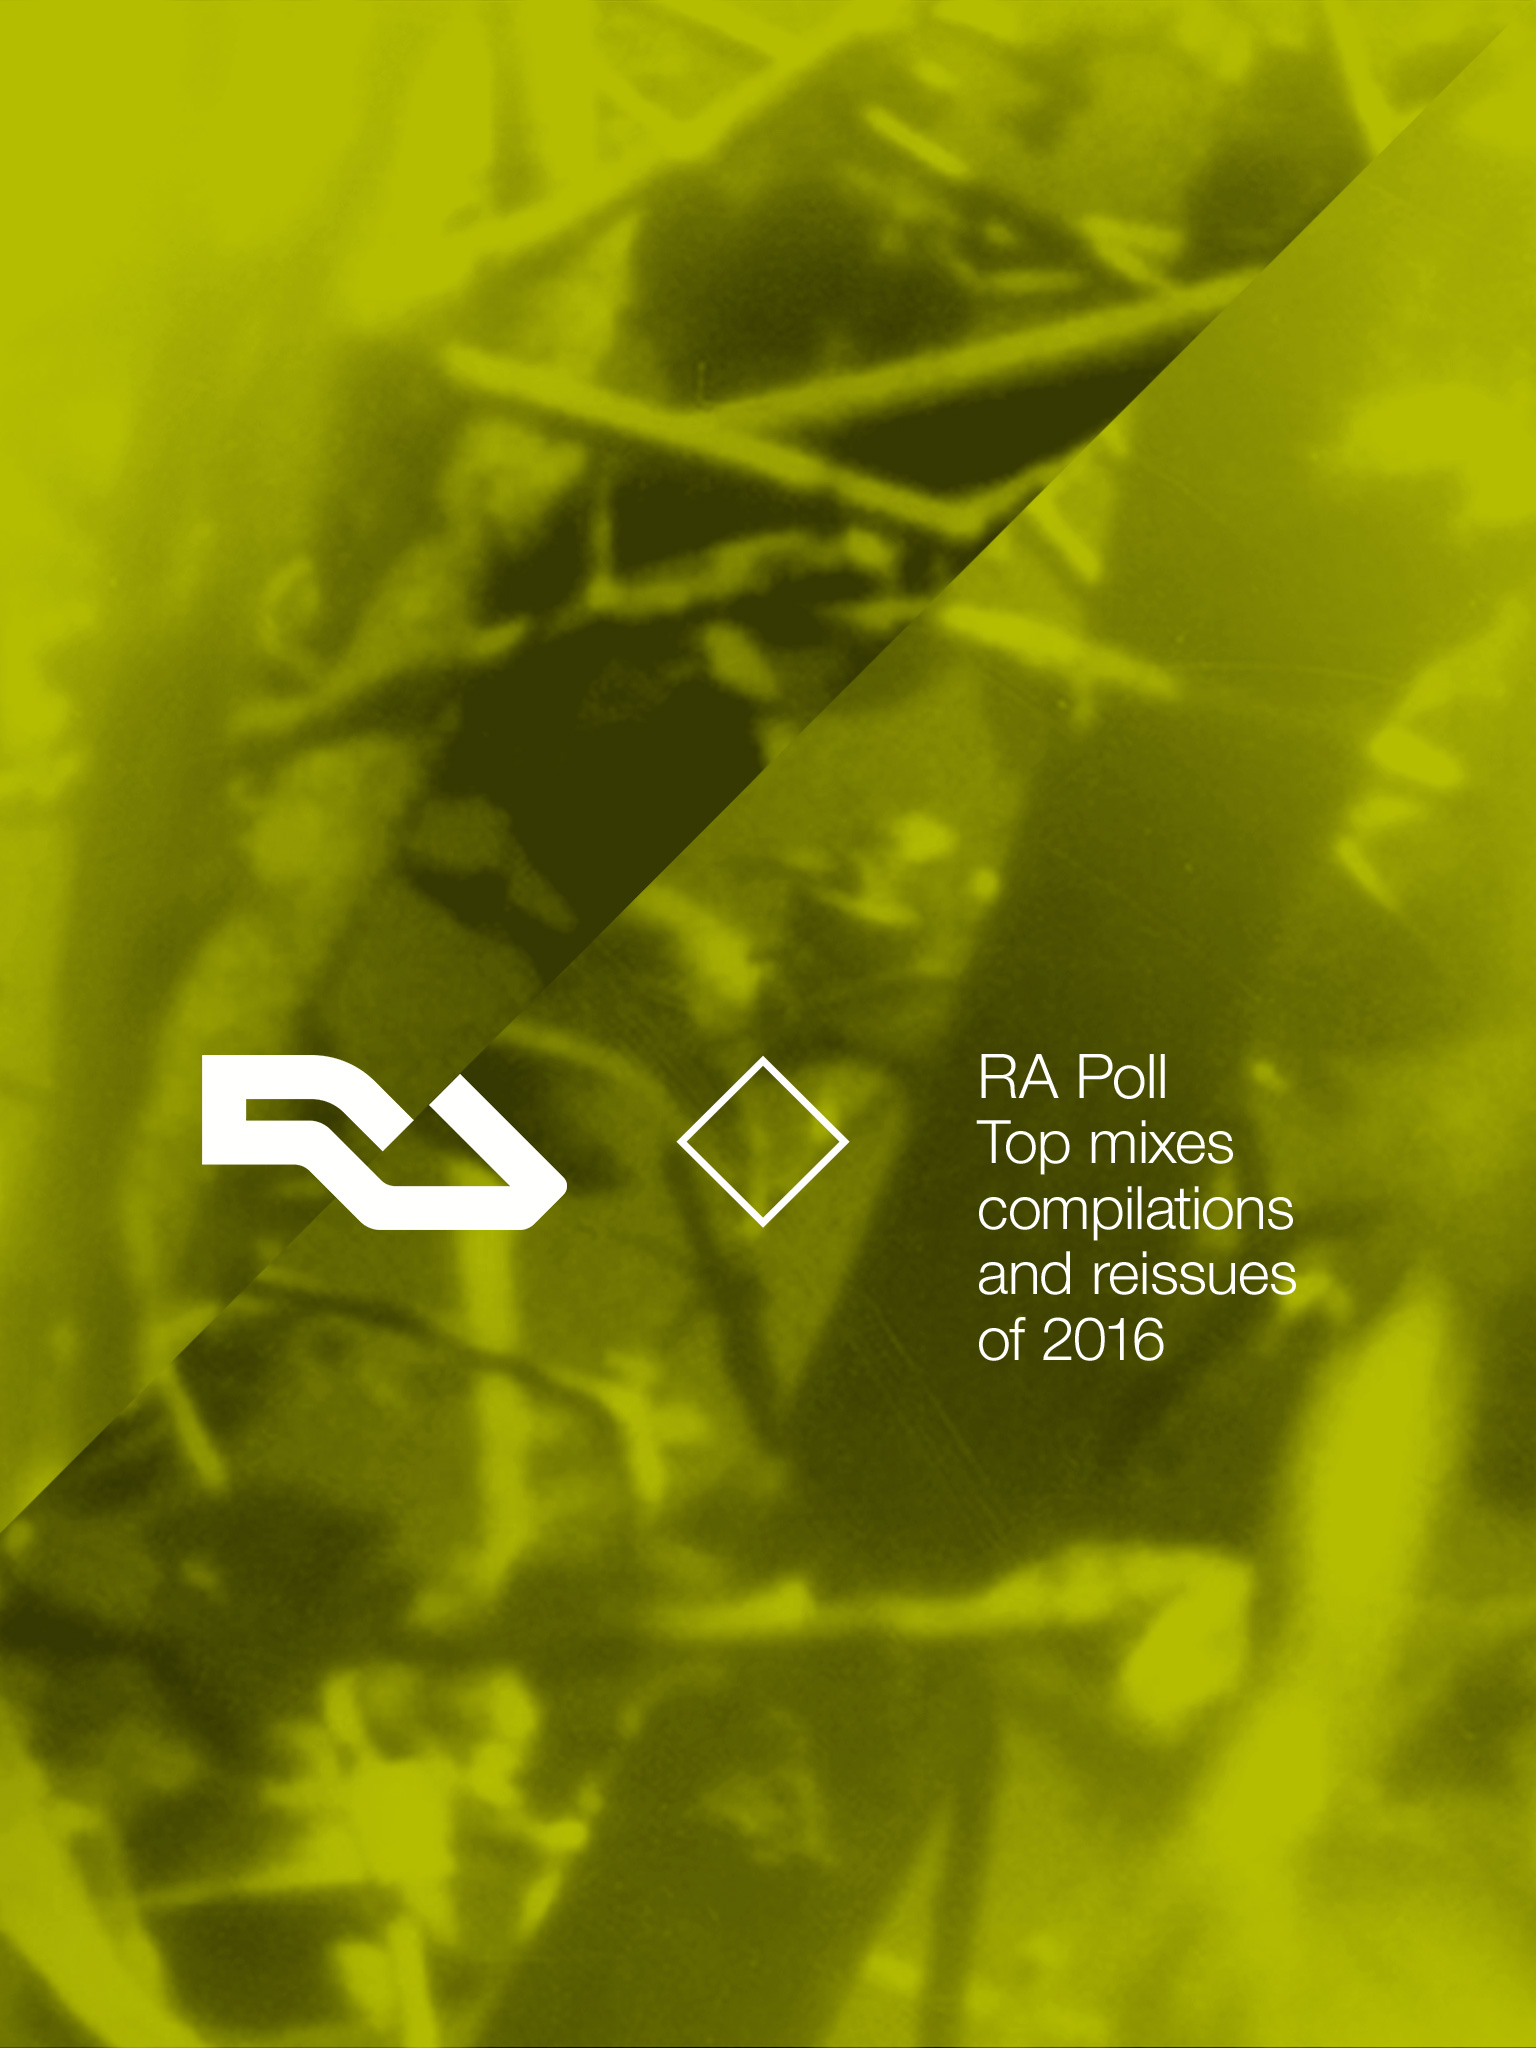 RA Poll: Top mixes, compilations and reissues of 2016